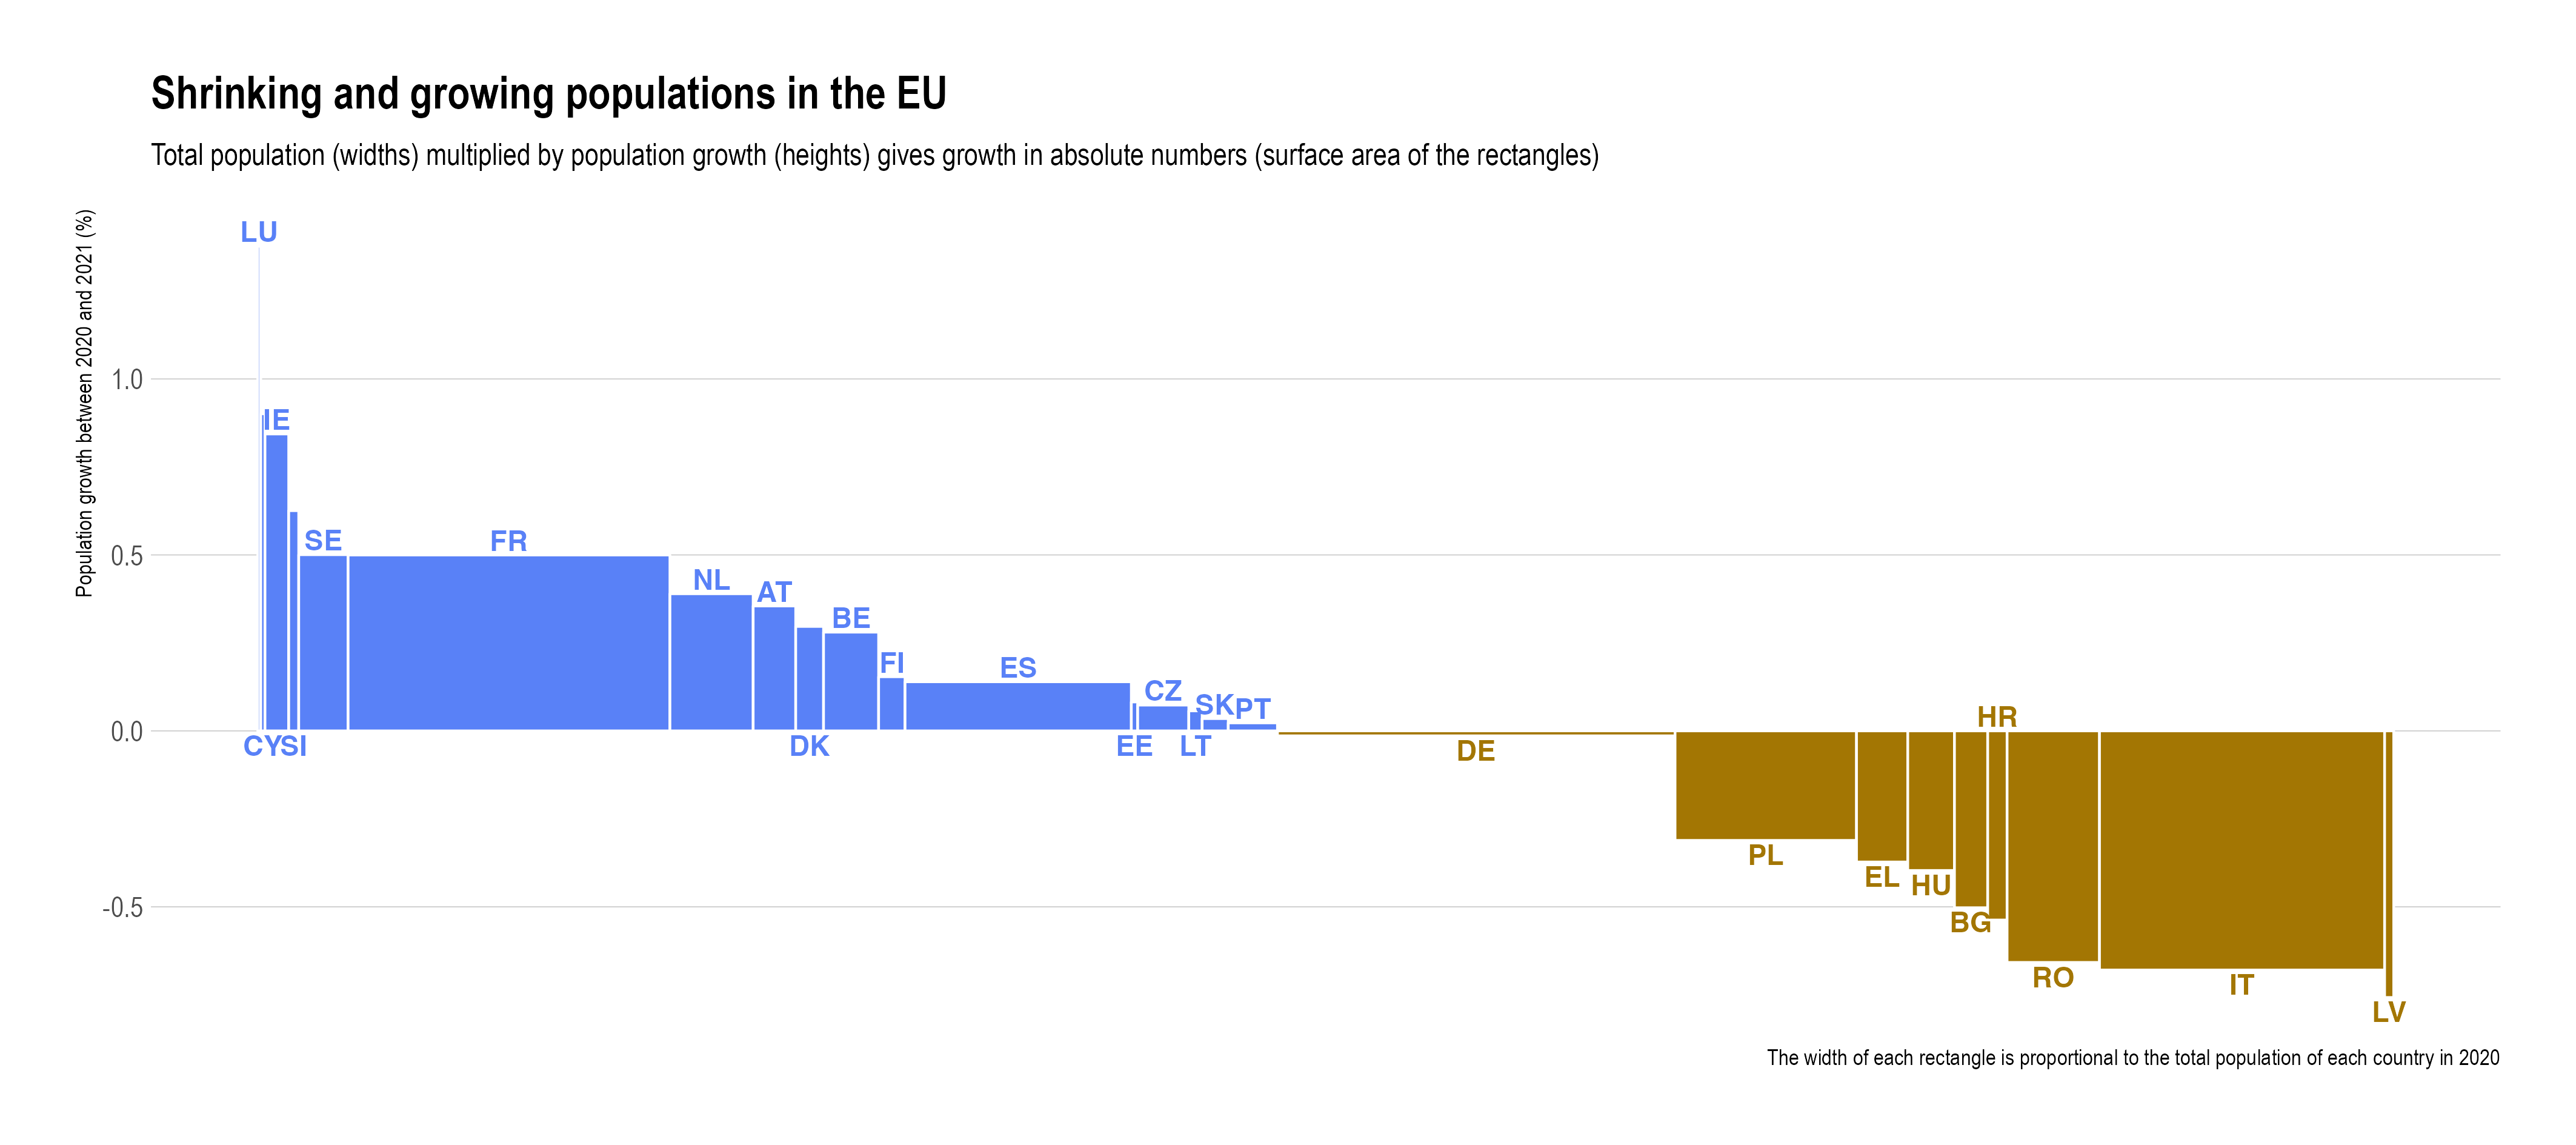 A chart titled Shrinking and growing populations in the EU, with bars representing countries. The height of the rectangles is proportional to population growth rate and the width is proportional to the population size, so the surface area of each rectangle represents the growth or shrink of the population in absolute numbers